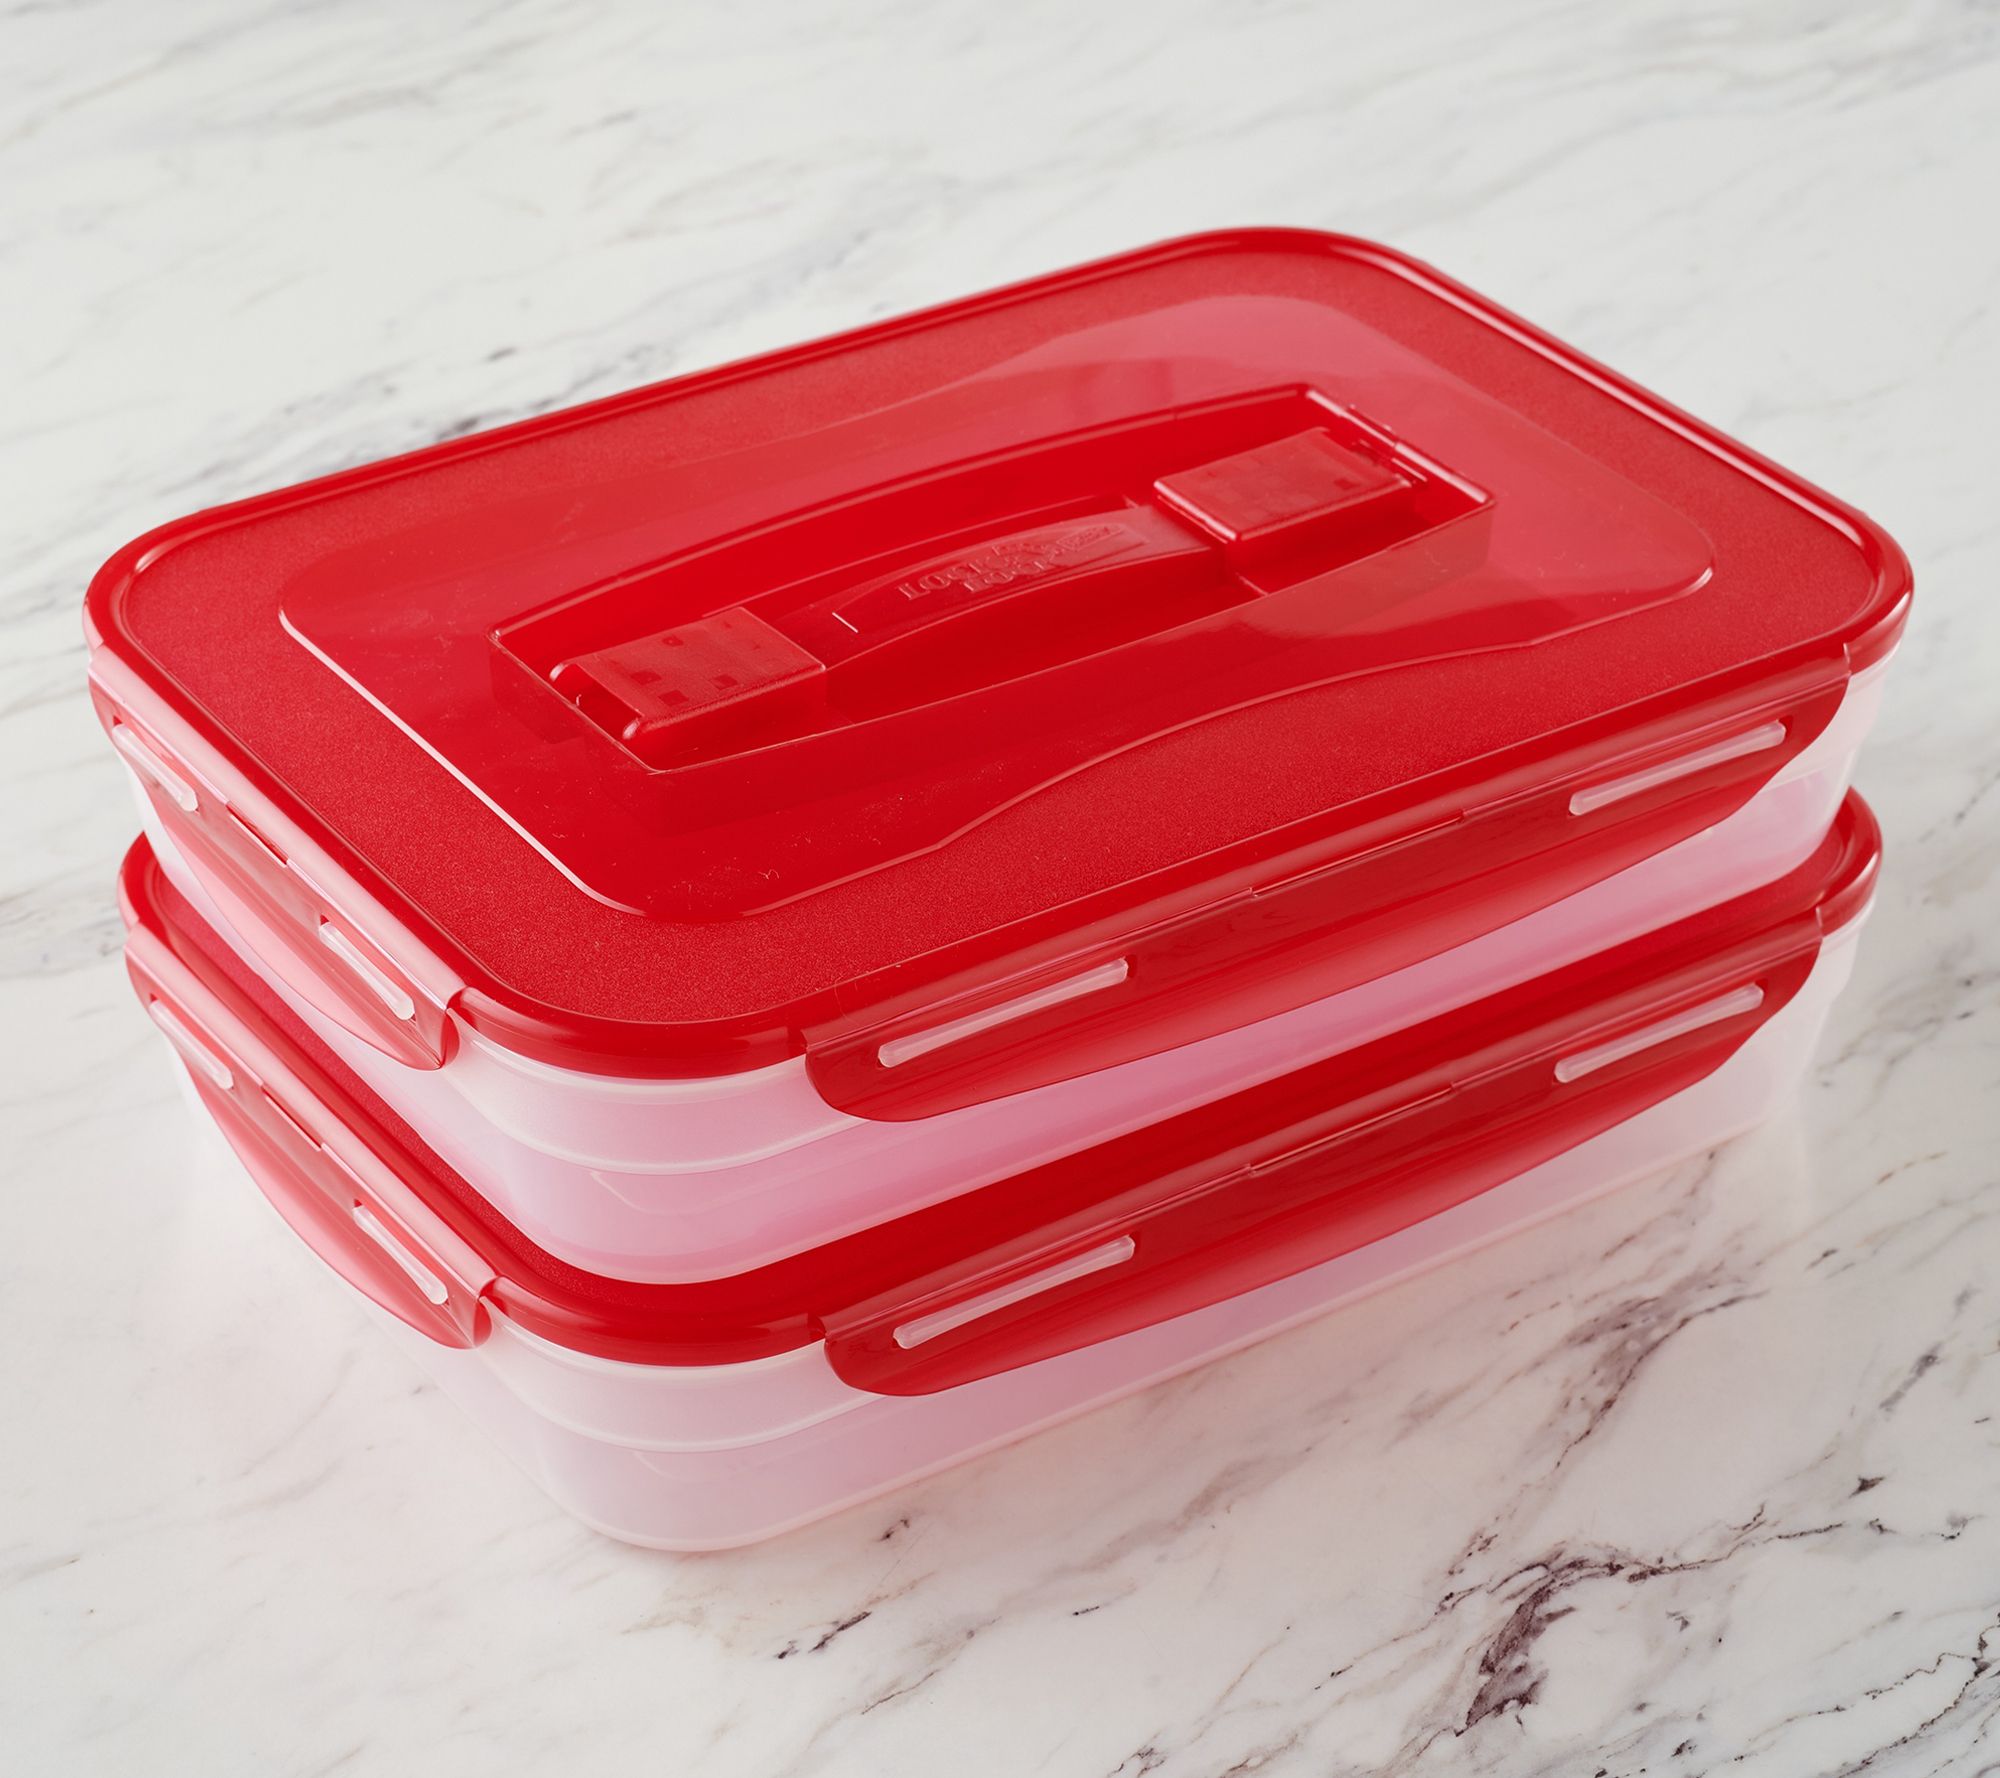 LocknLock XL Multi-function Storage Containerwith Handles ,Red